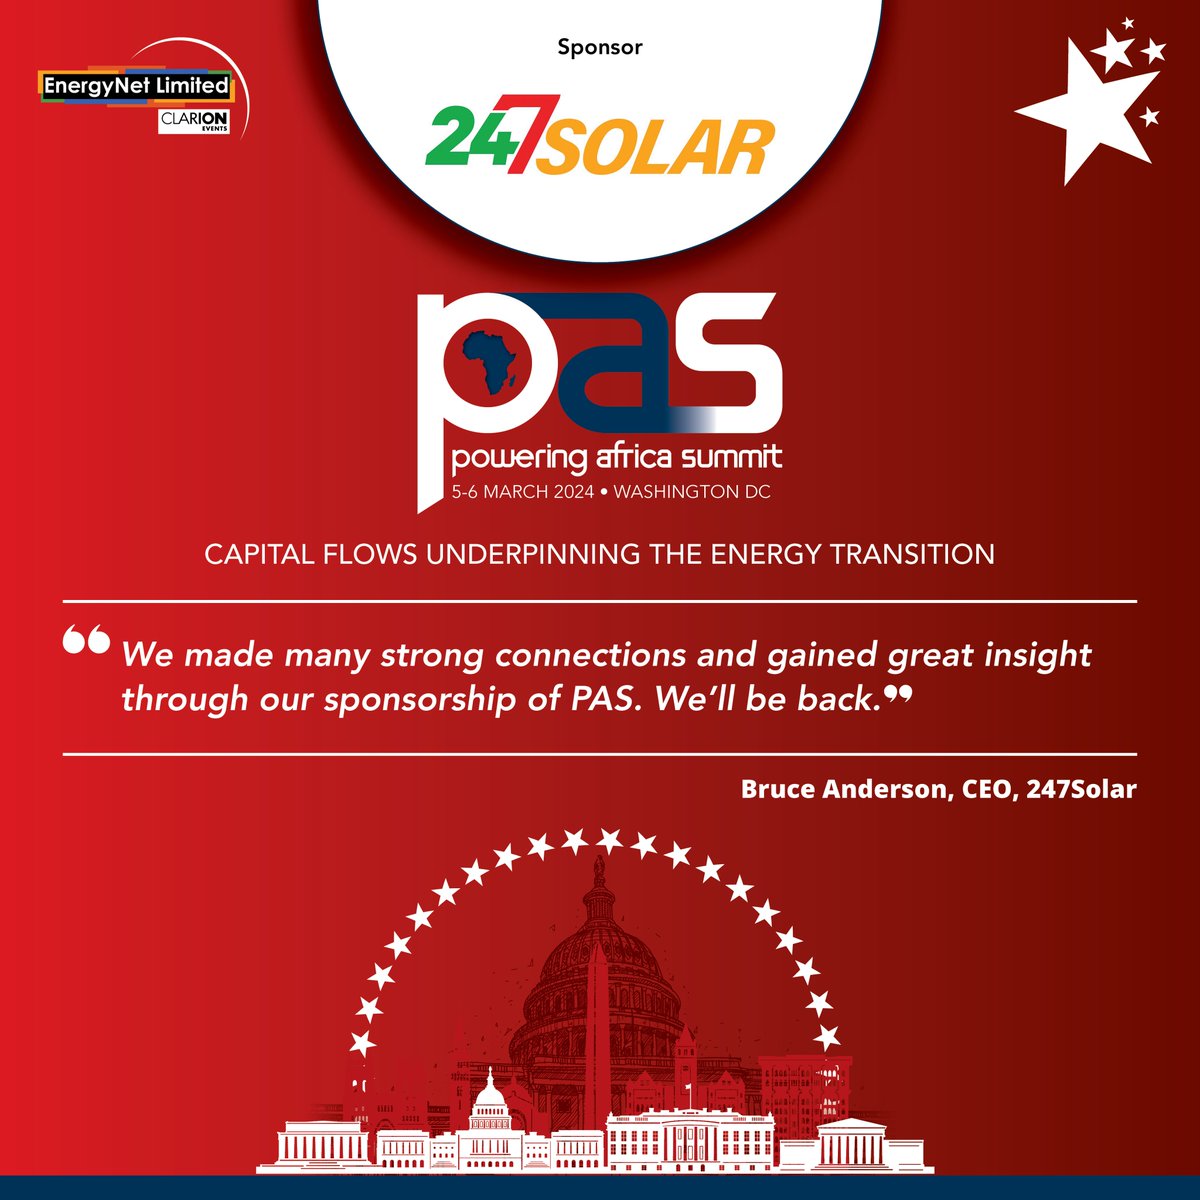 We are delighted to welcome @24_7Solar as our Sponsor of #PAS24. It's great hearing from Bruce Anderson about @24_7Solar making strong connections through PAS! Find out more here: bit.ly/3Uwbmi5 📅 5-6 March 📍#WashingtonDC